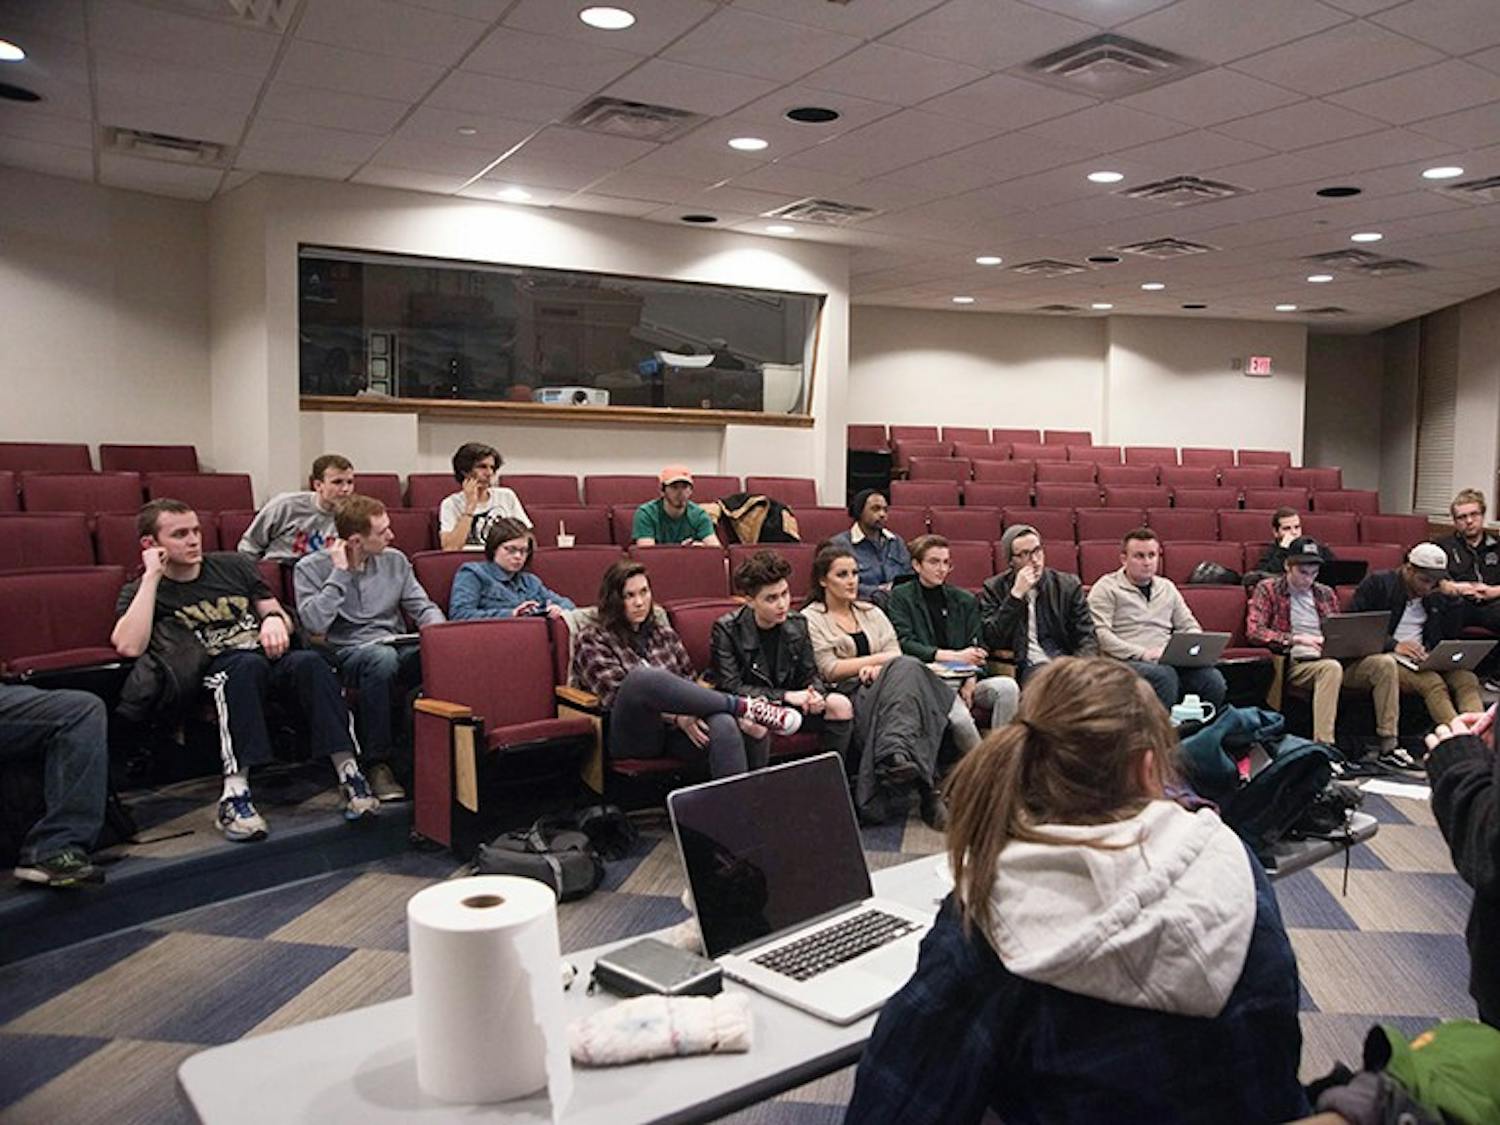 "Films and stuff" was created in the Fall 2016 semester, and many people are still joining, here Sami Edelstein talks with the groups about upcoming plans and events on Febreaury 15, 2017. (Meagan Hall | Post Photographer)